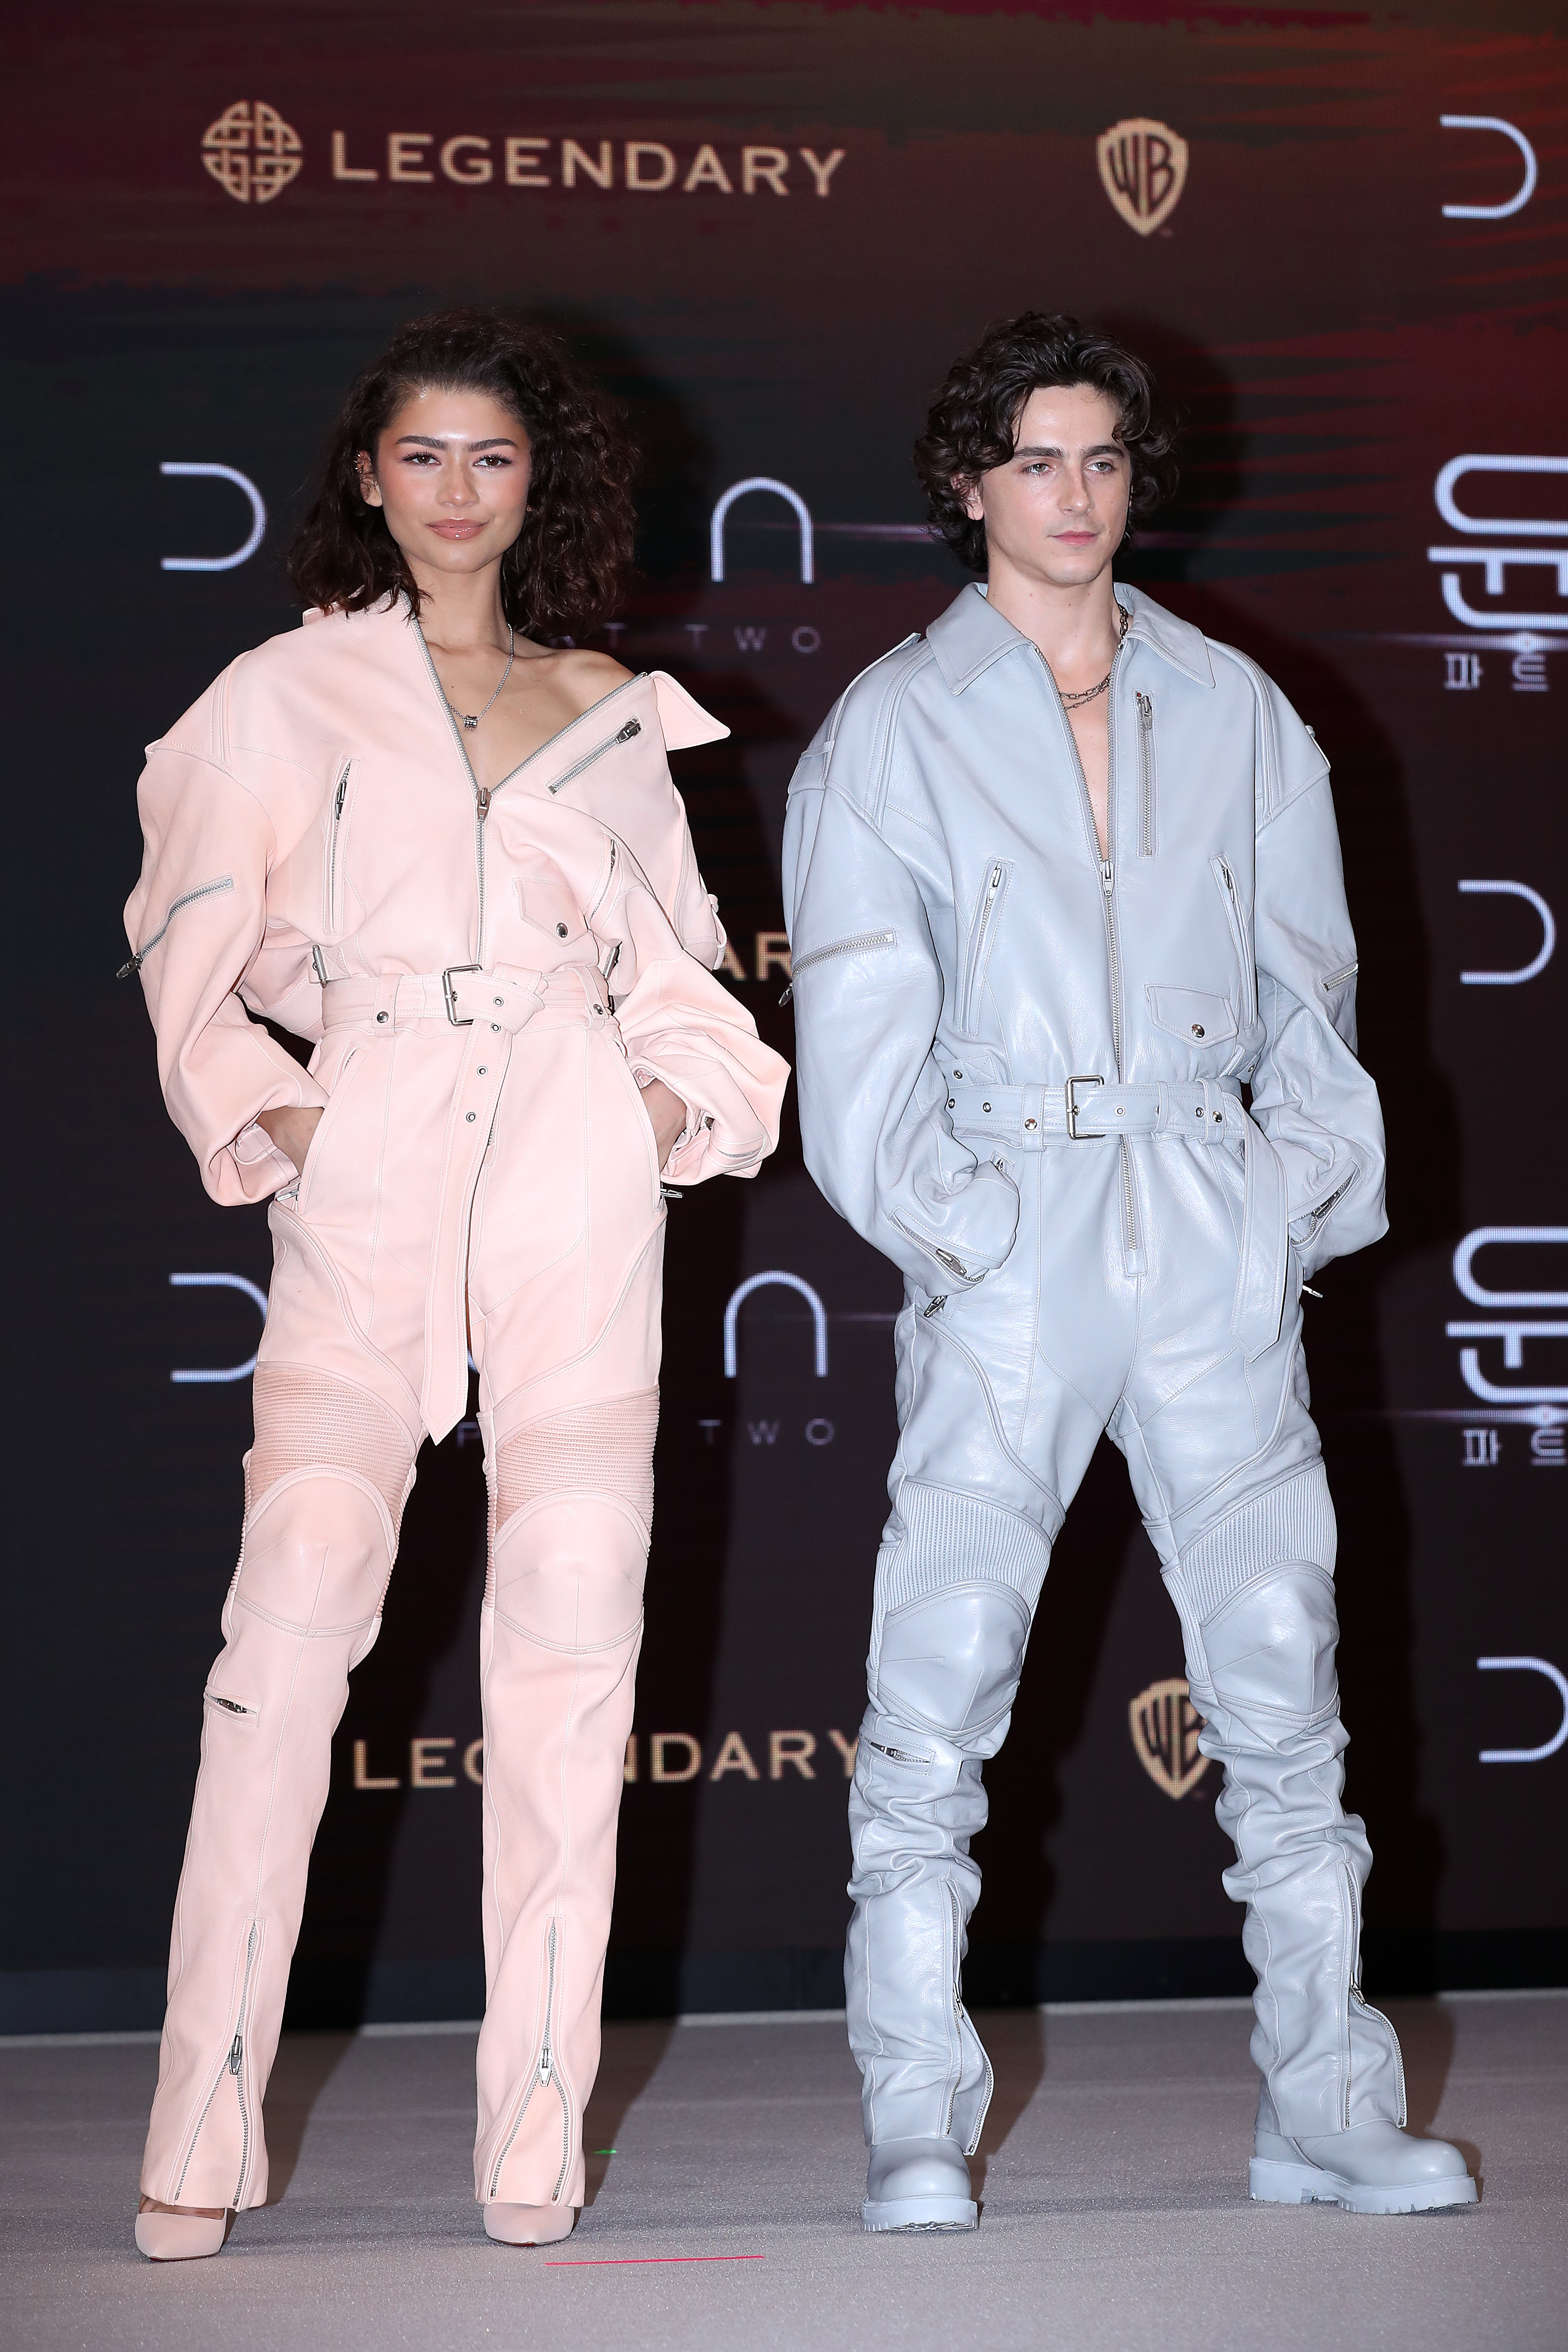 Zendaya and Timothée Chalamet stand side by side; both in stylish belted jumpsuits and boots